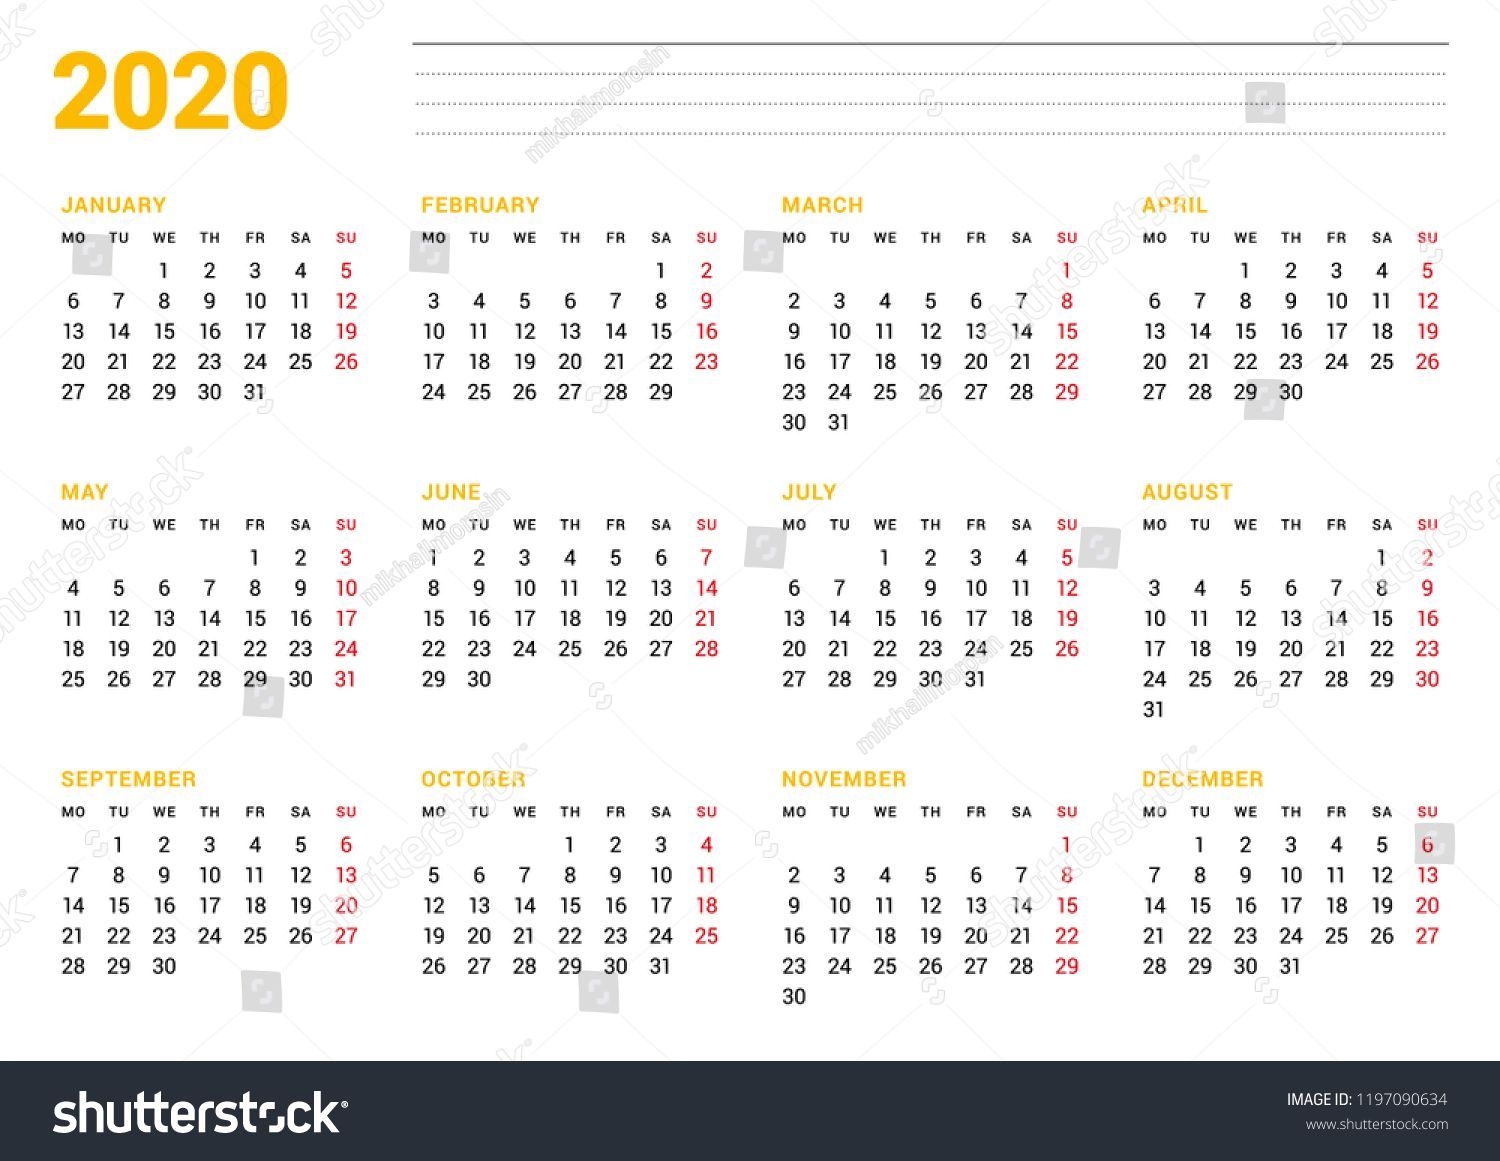 Calendar Template For 2020 Year Stationery Design Week